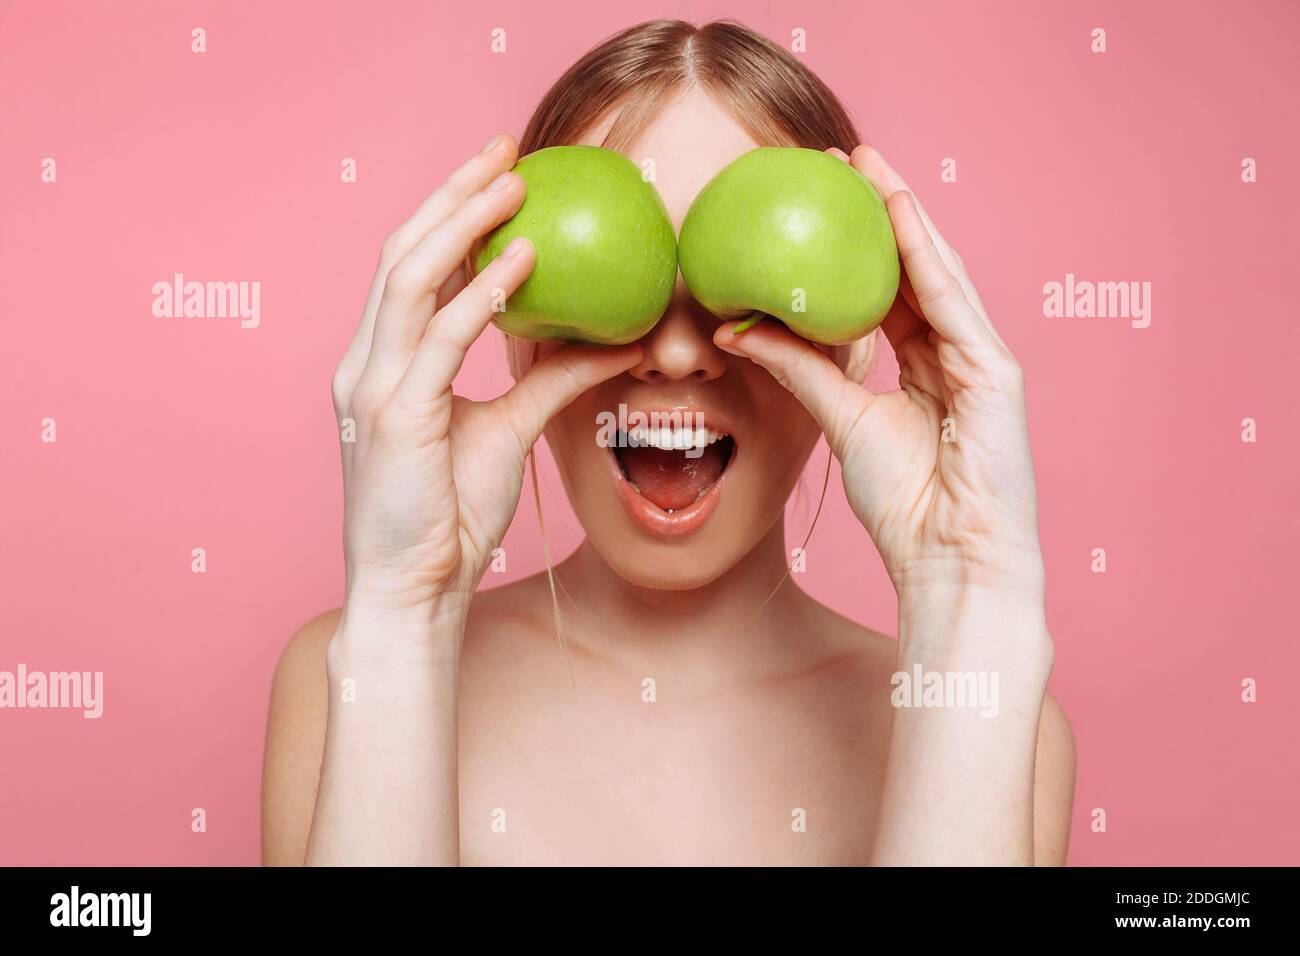 Portrait of a happy beautiful woman holding an apple, covering her eyes with apples, on pink background. Natural beauty concept Stock Photo